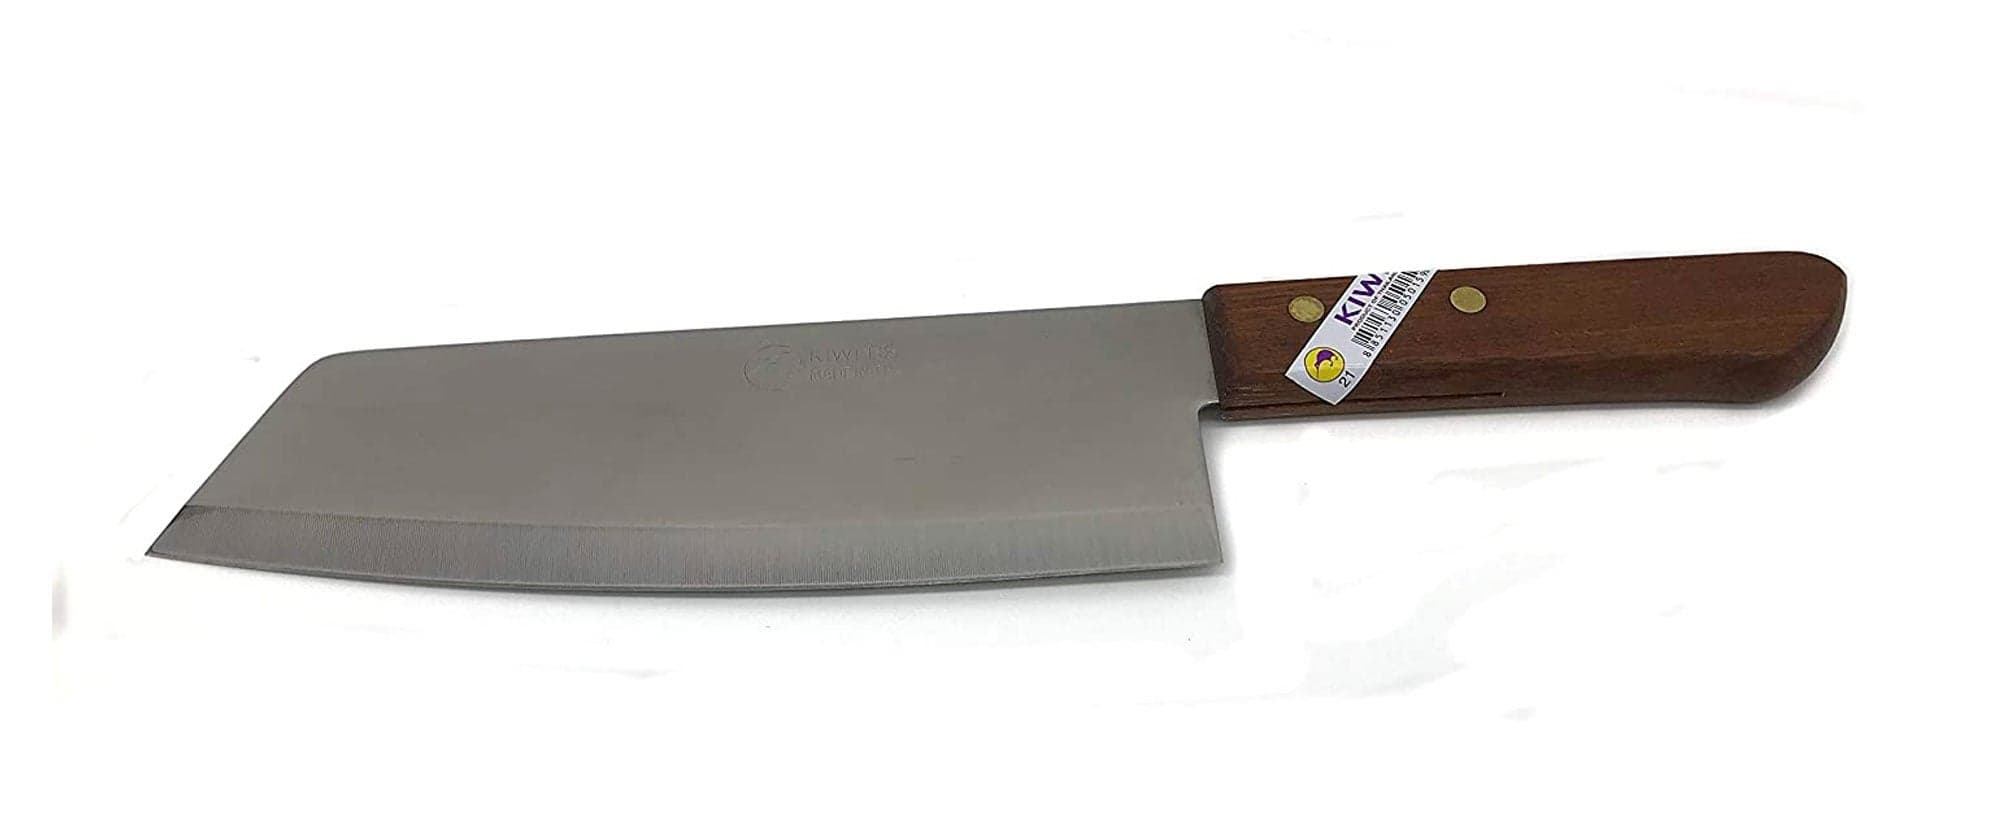 Kiwi Brand Stainless Steel 8 inch Thai Chef’s Knife No. 21